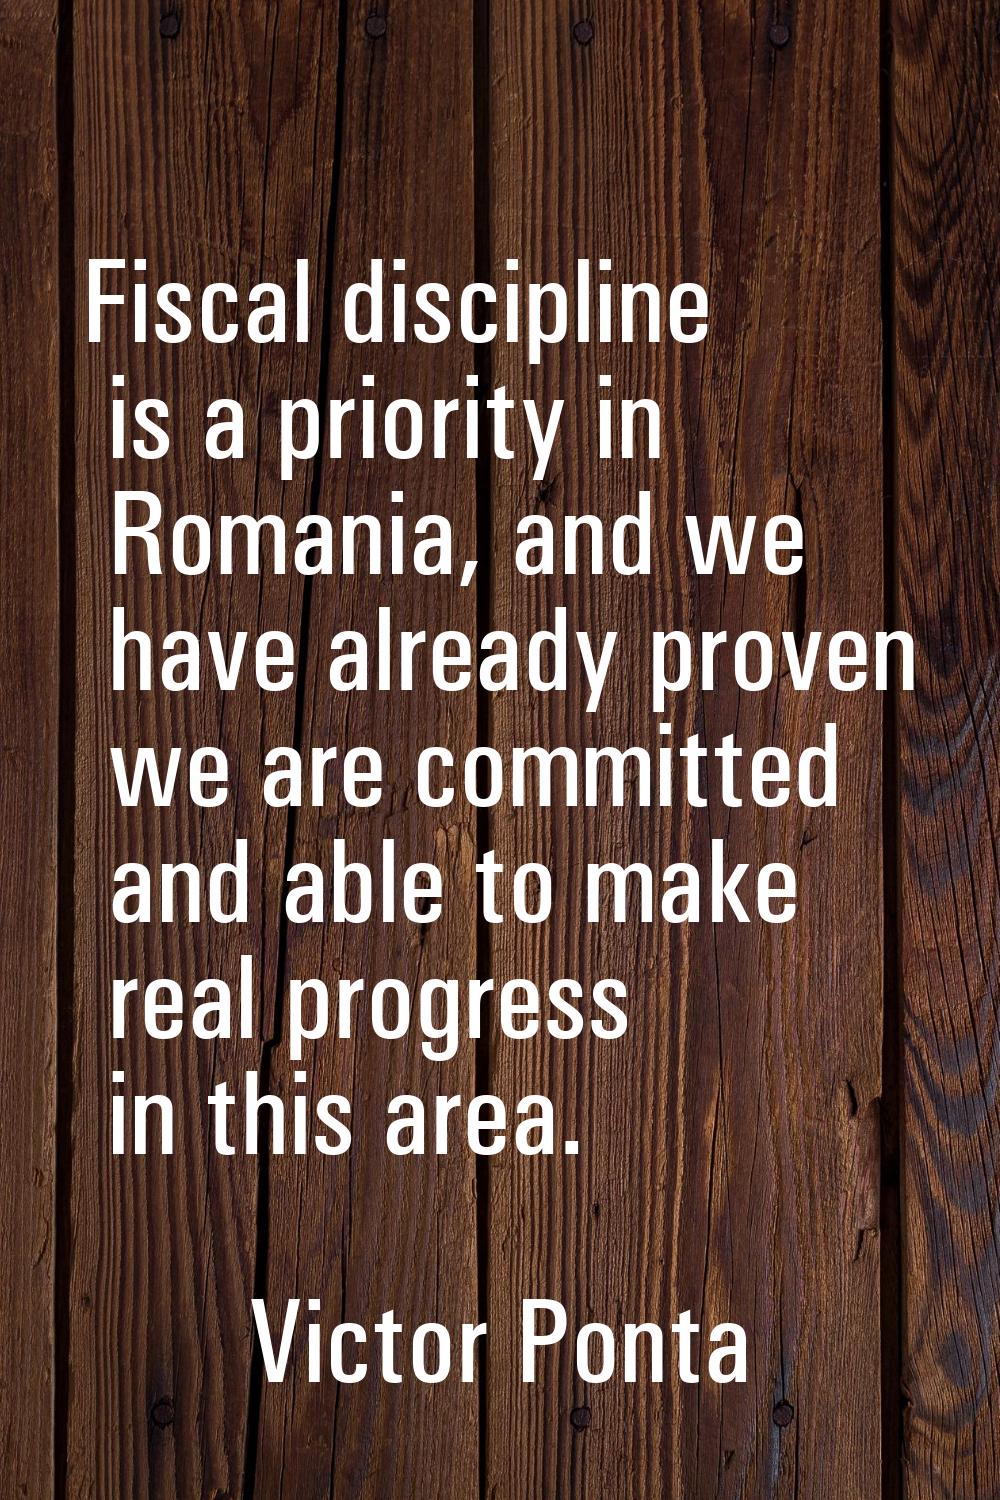 Fiscal discipline is a priority in Romania, and we have already proven we are committed and able to